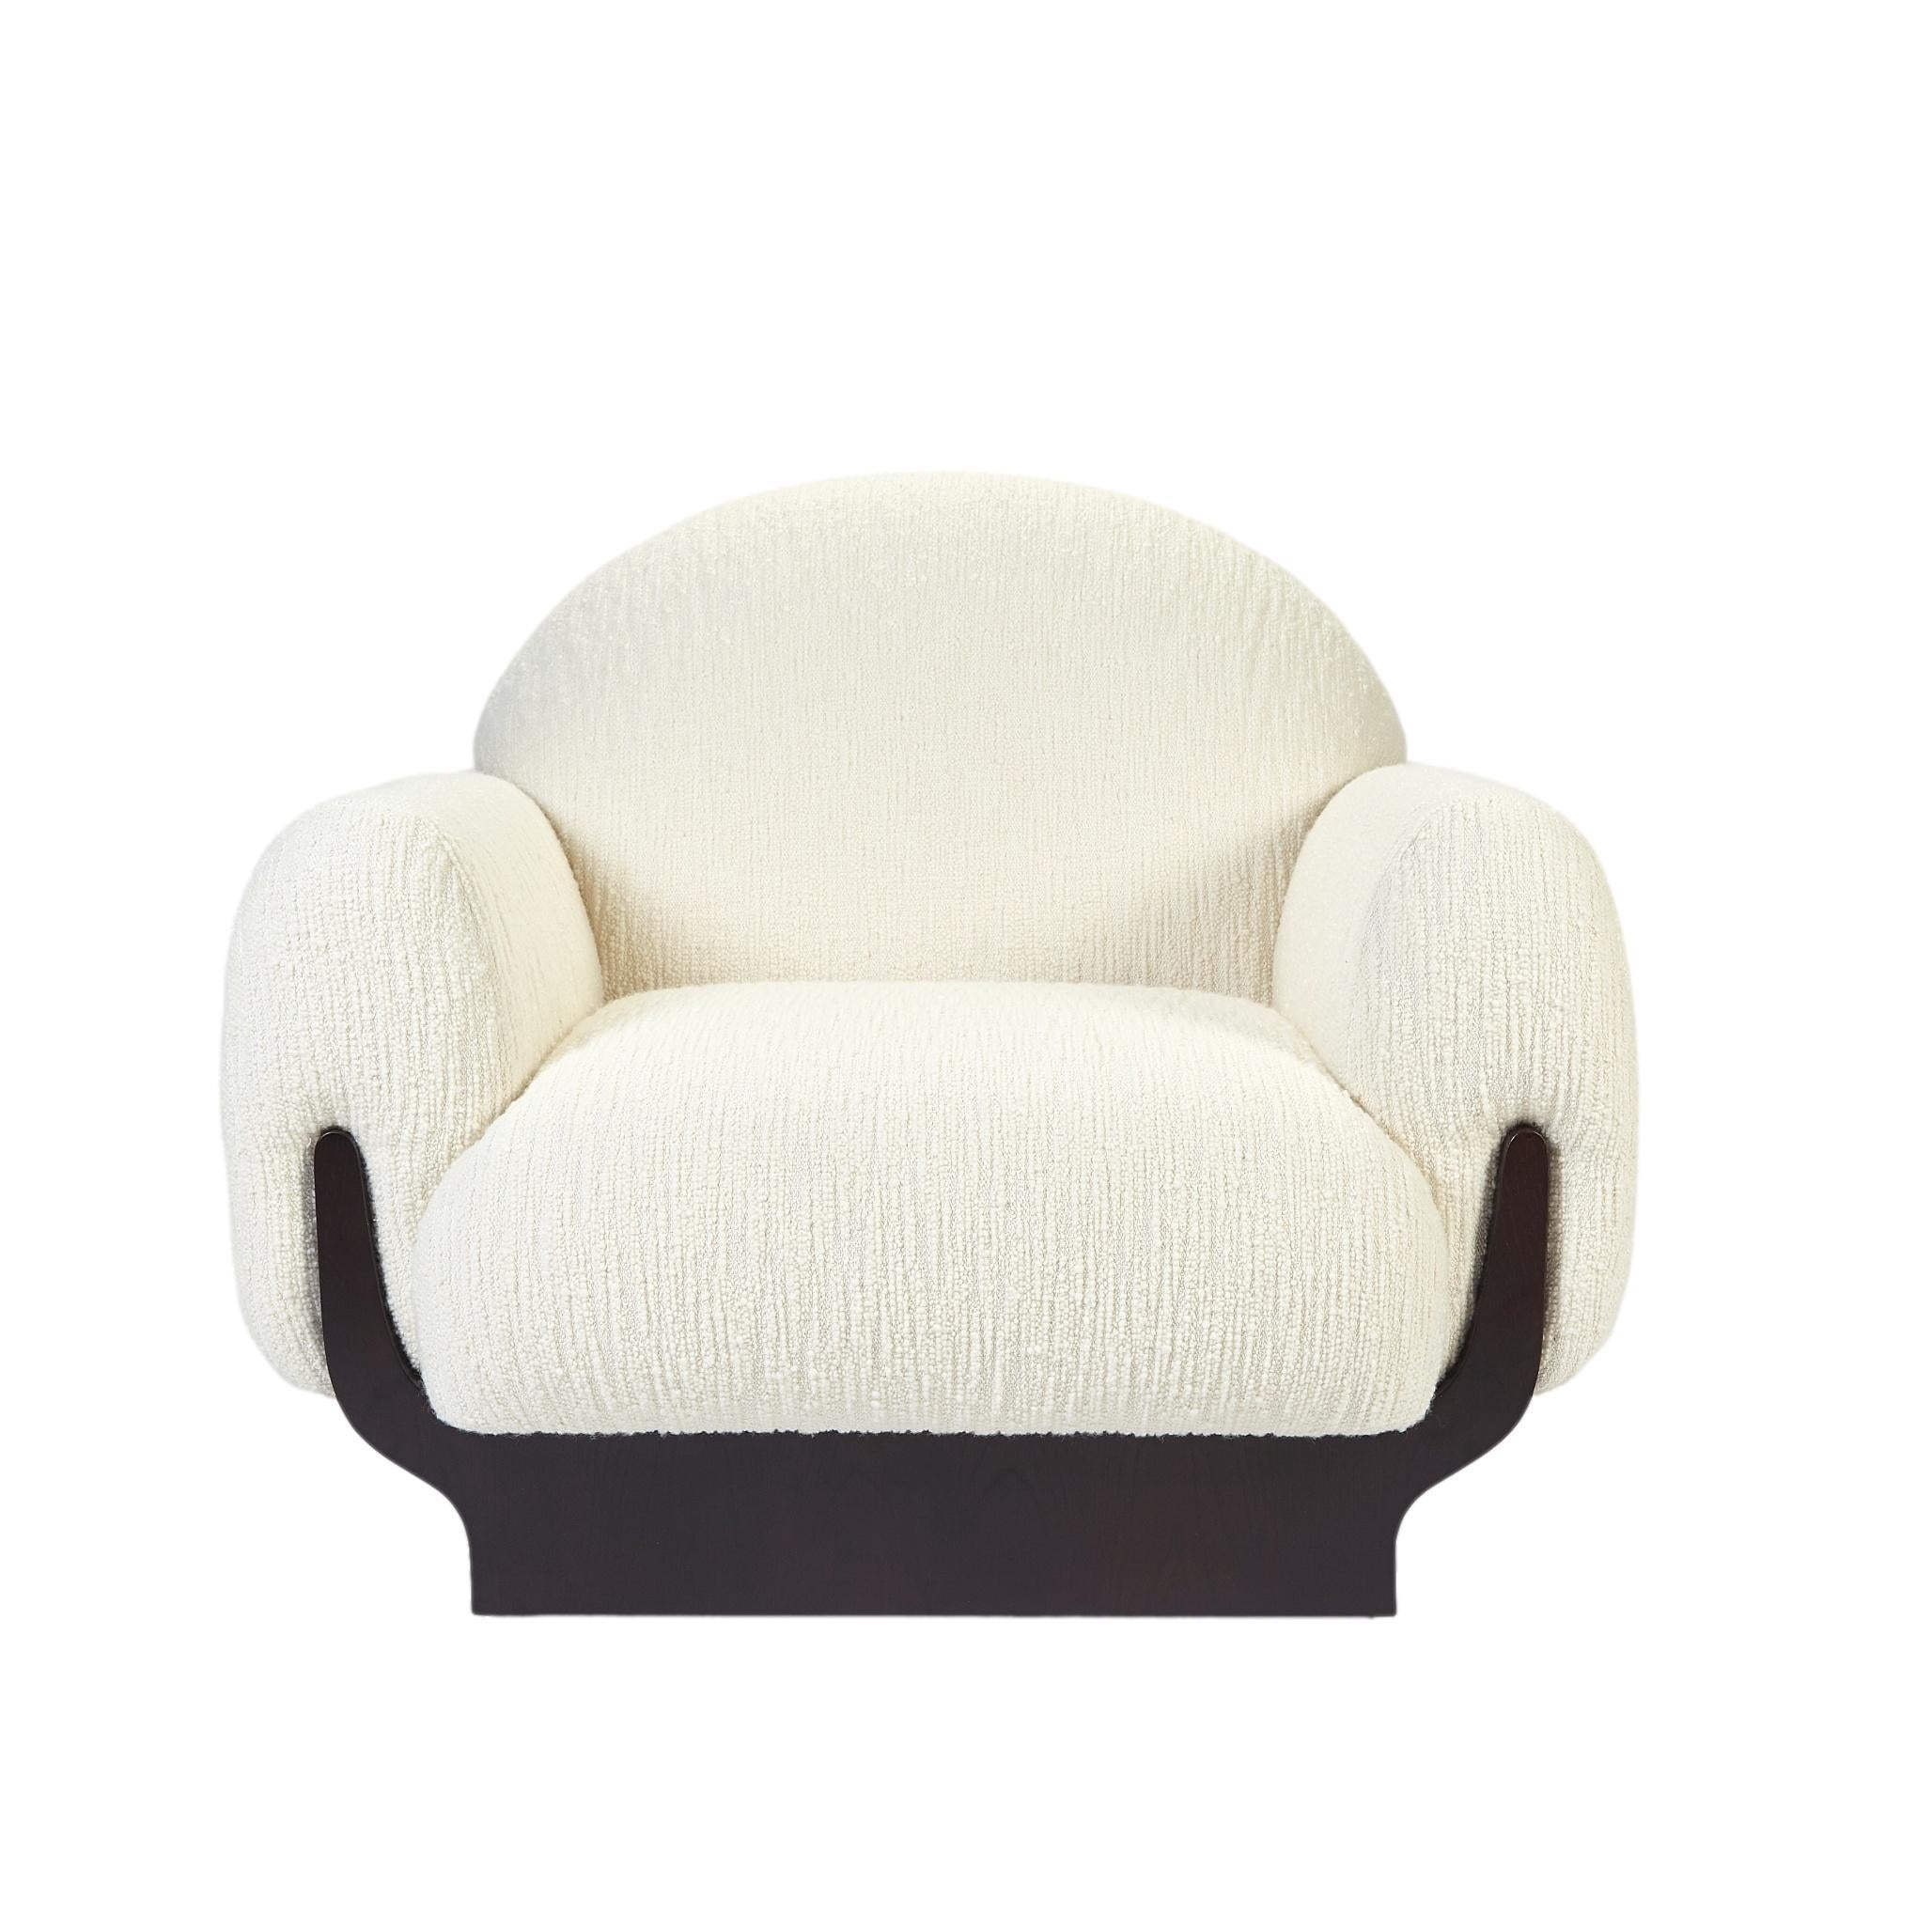 The seat is upholstered in high quality boucle fabric. The darkened wood structure provides strength and lightness to the piece.
Dimensions: Width 40.5” x depth 38.5” x height 33” x seat height 15.75”
Custom sizes and materials available. 
Made to